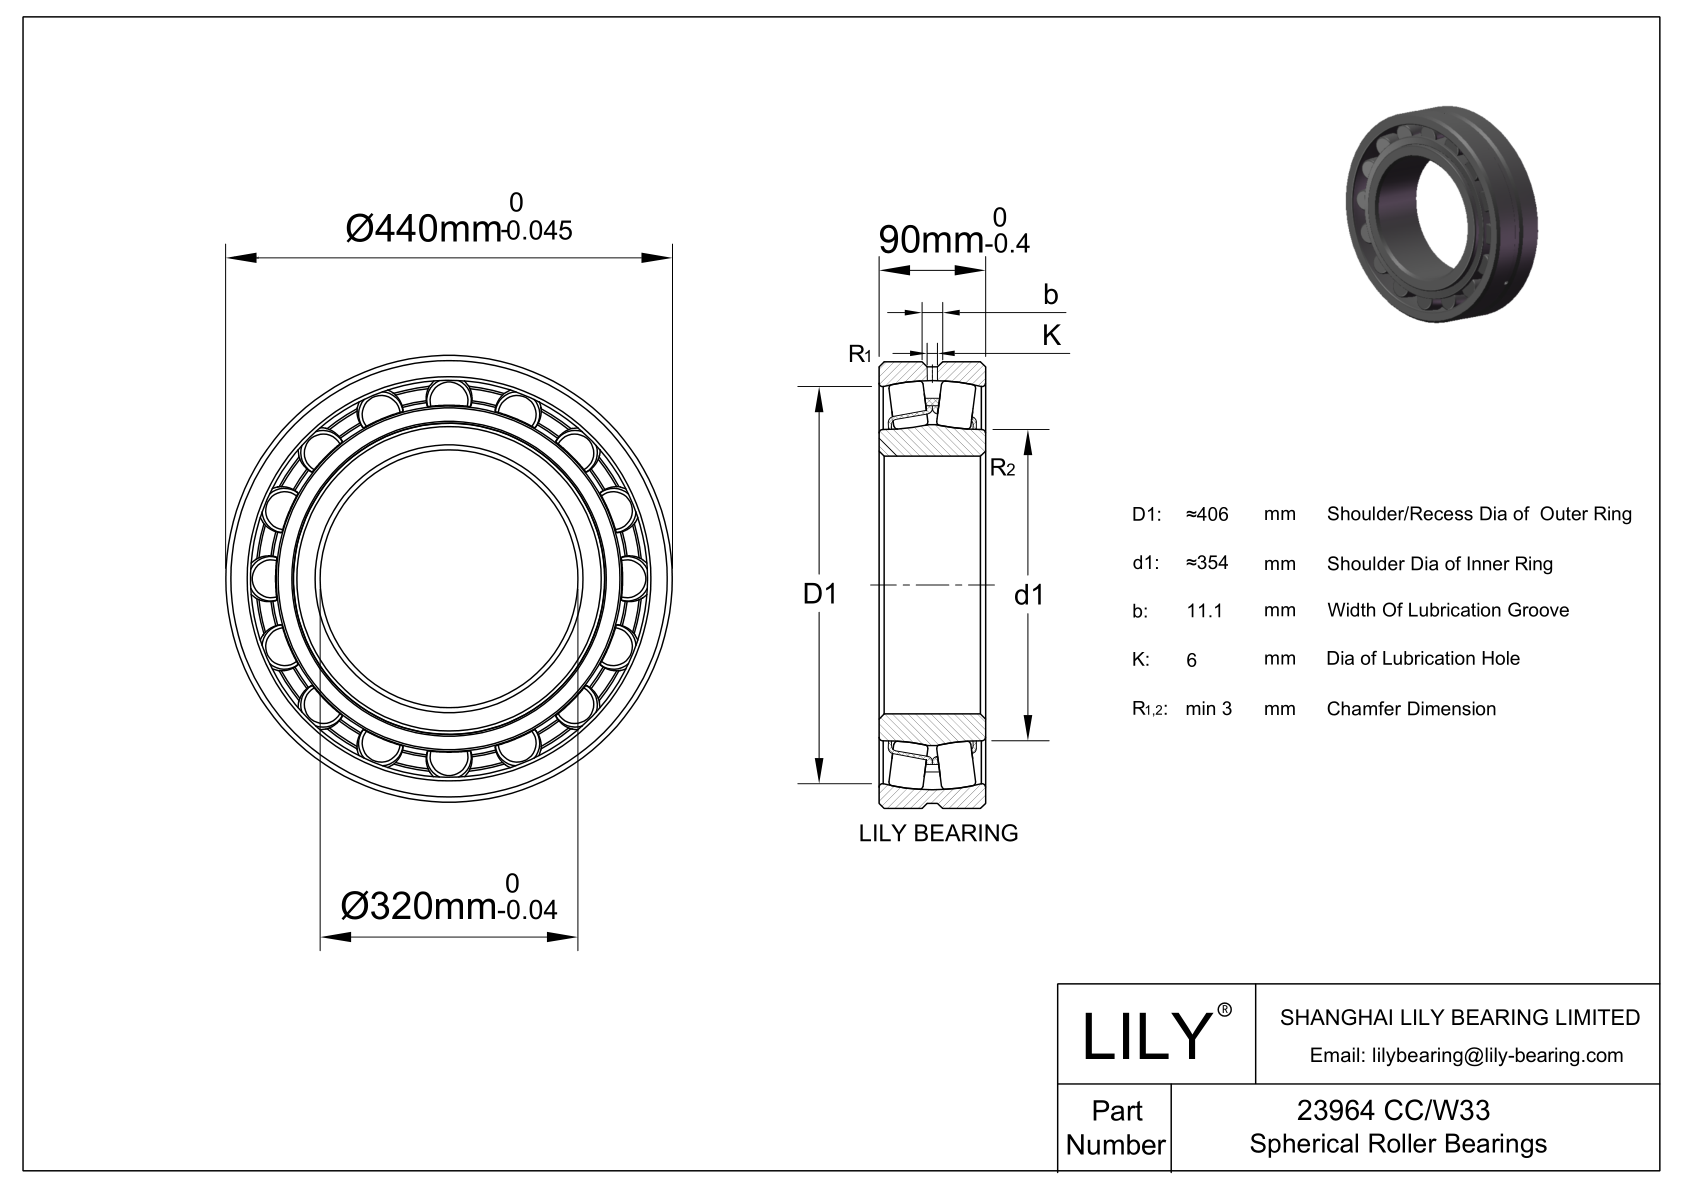 23964 CC/W33 Double Row Spherical Roller Bearing cad drawing